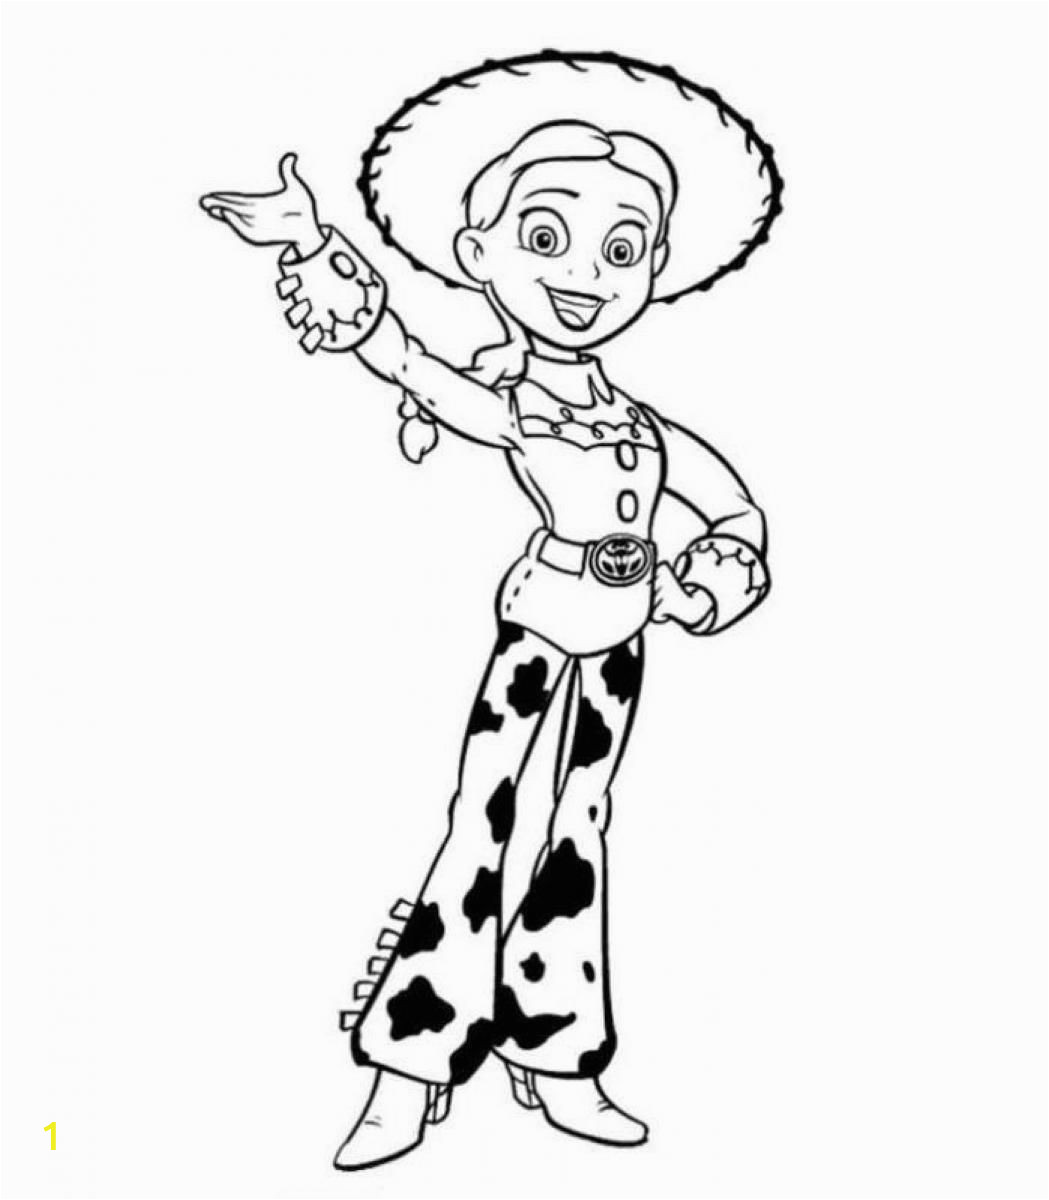 Disney toy Story 3 Coloring Pages Free Printable Disney toy Story Coloring Pages Coloring Home